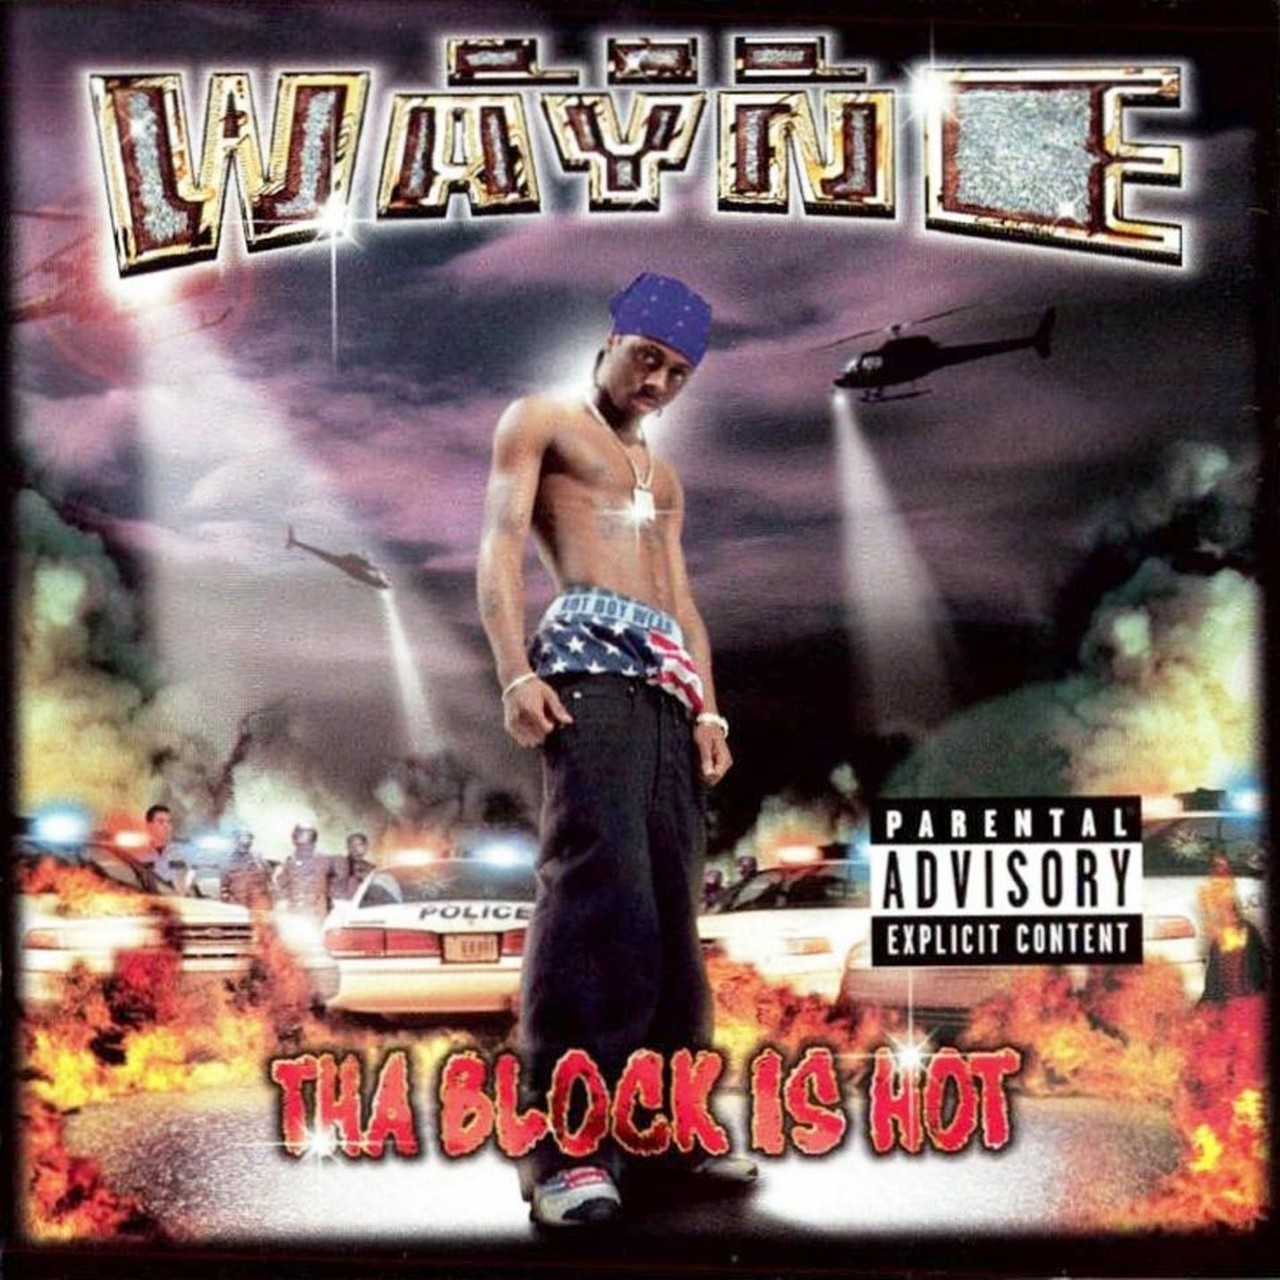 BACK IN THE DAY |11/2/99| Lil Wayne released his solo debut, Tha Block Is Hot, on